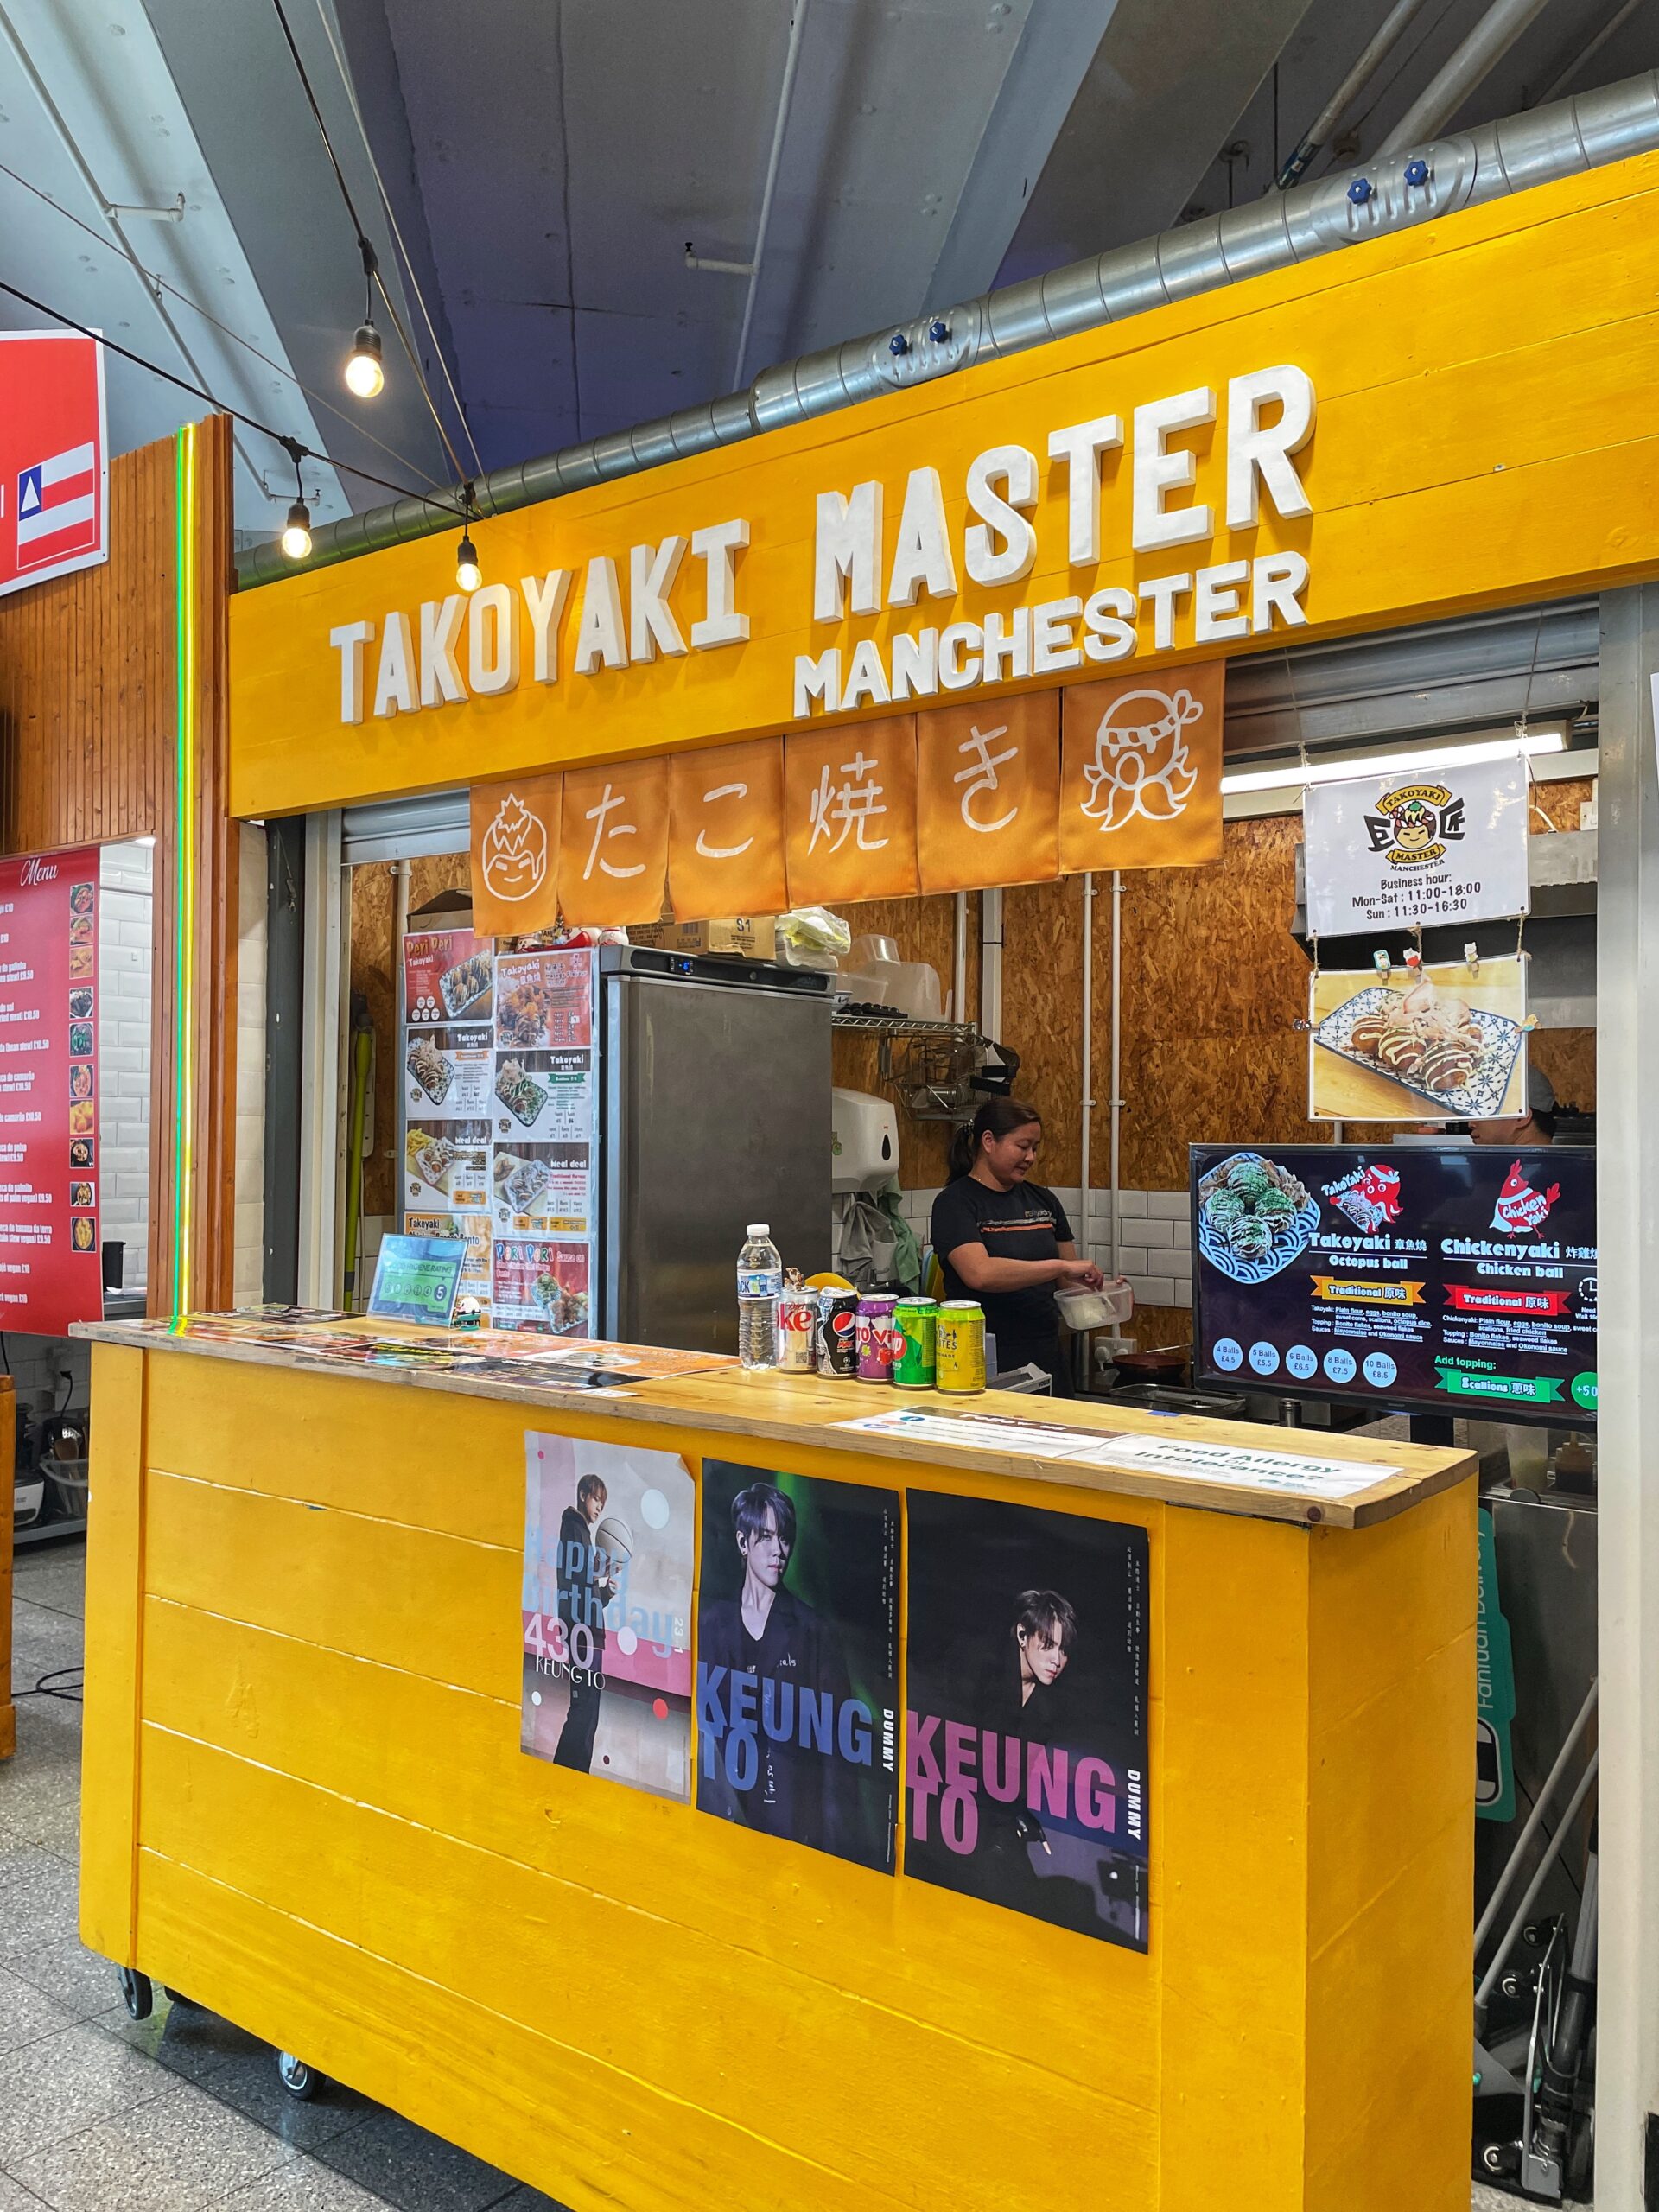 Takoyaki Master is one of the Arndale Market traders affected by the fire